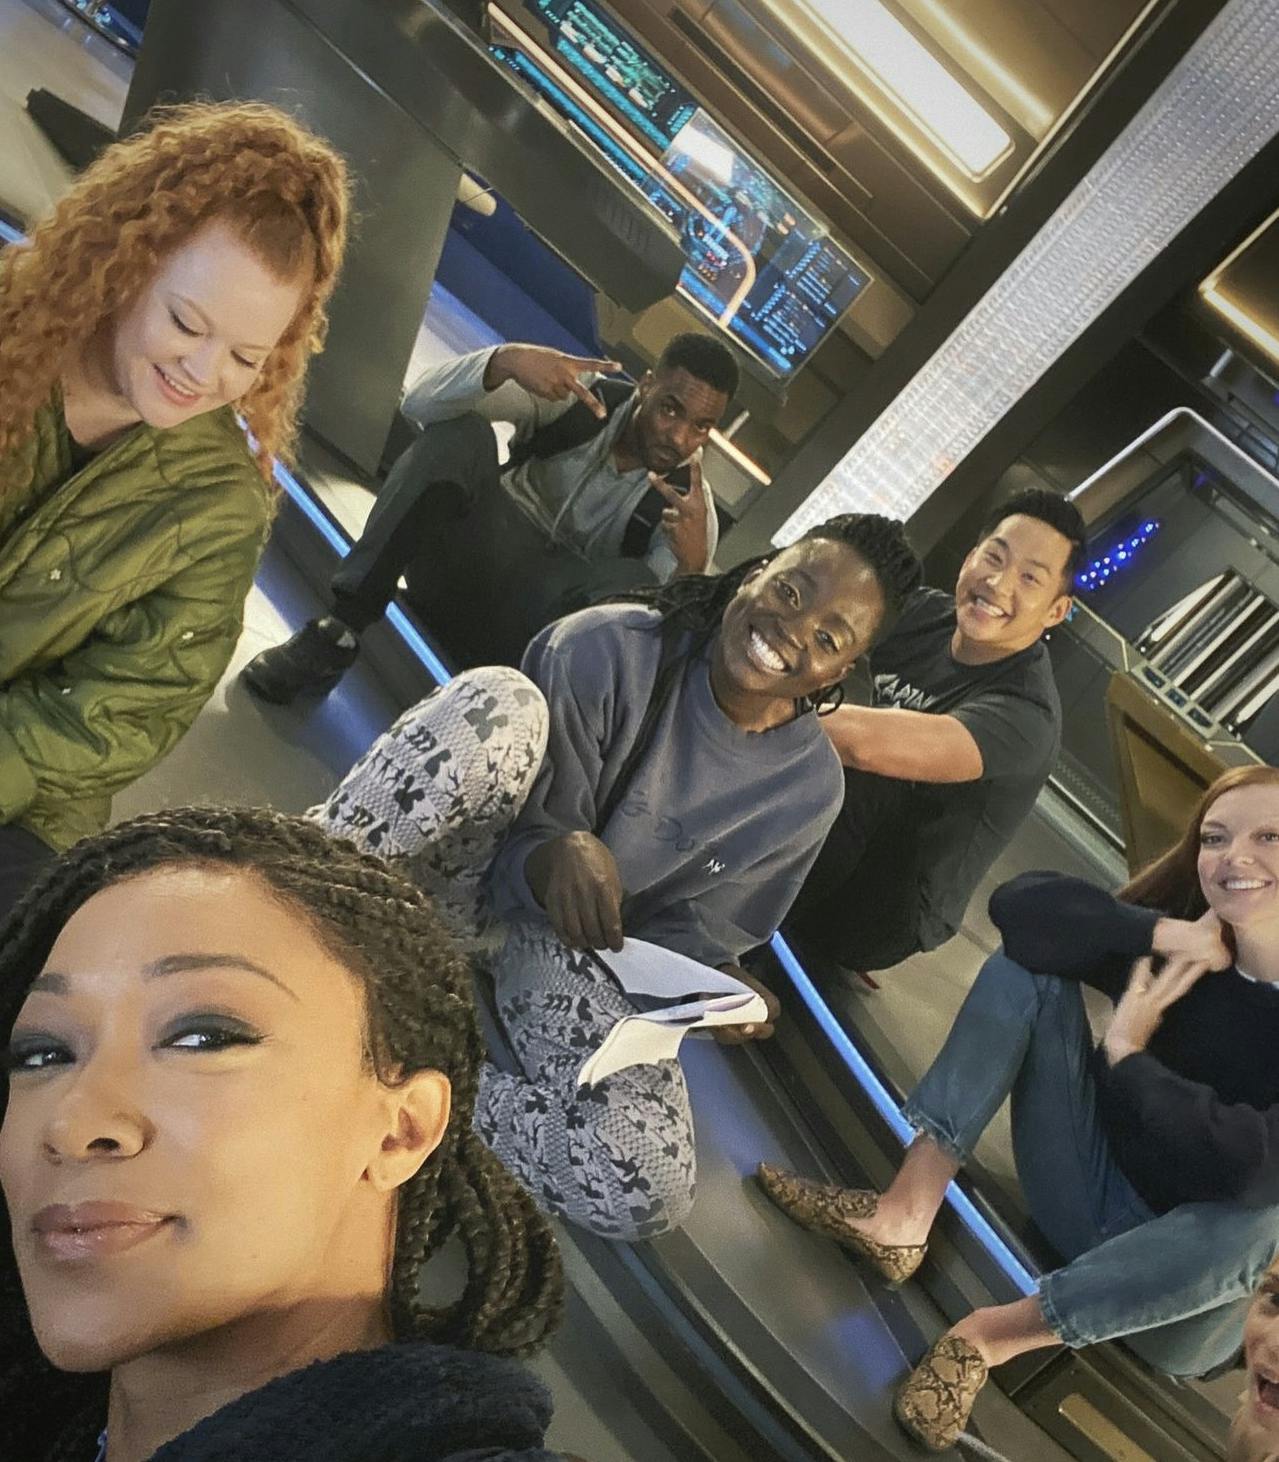 Behind-the-scenes of the Star Trek: Discovery production with Sonequa Martin-Green, Mary Wiseman, Patrick Kwok-Choon, Emily Coutts, Ronnie Rowe, and Oyin Oladejo